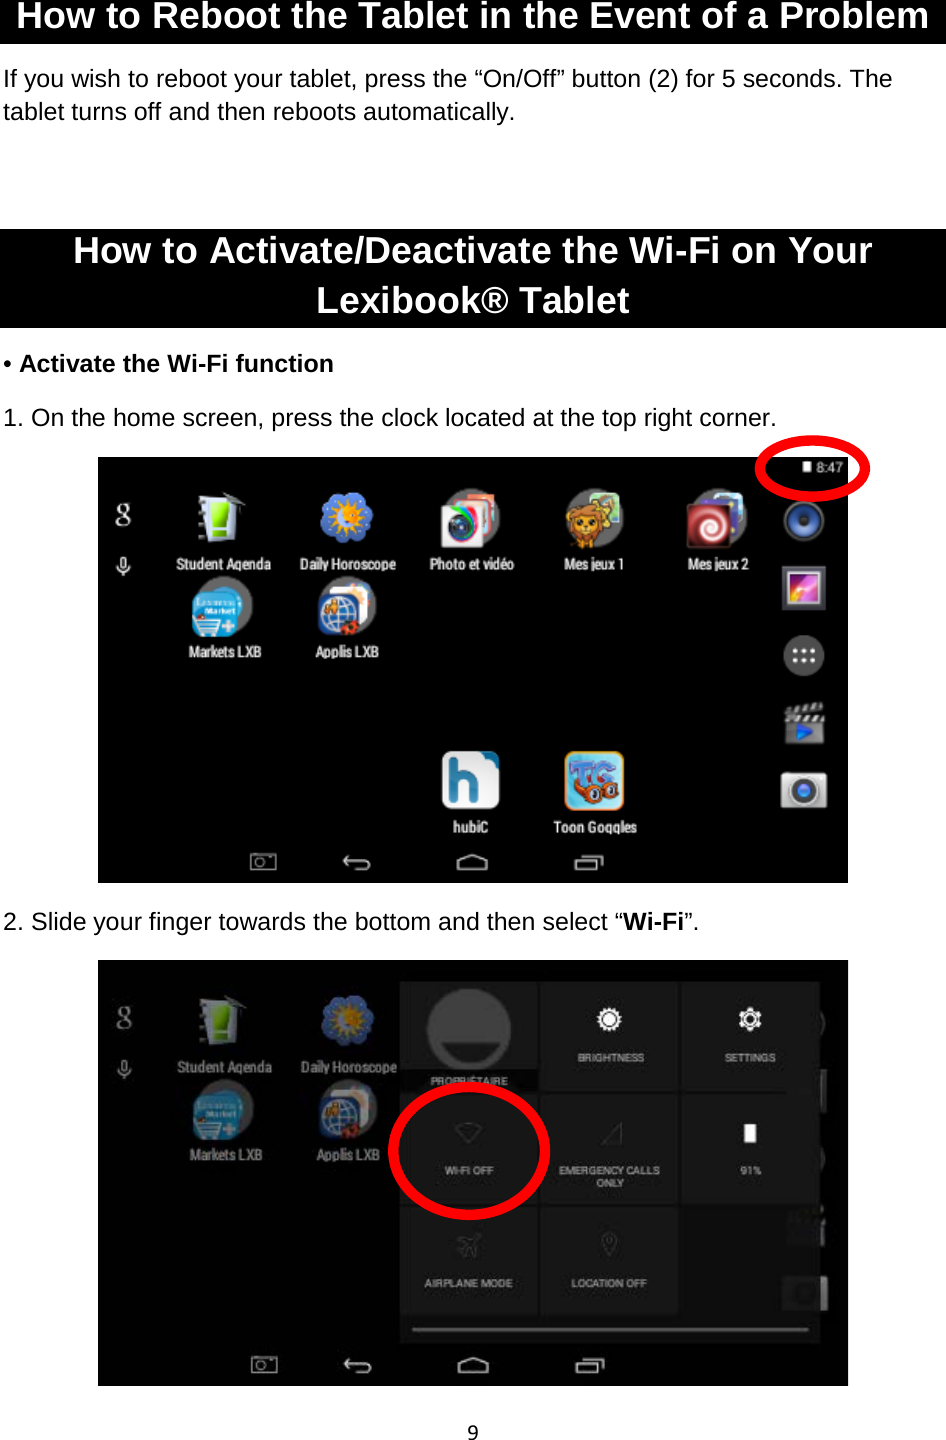 9  How to Reboot the Tablet in the Event of a Problem If you wish to reboot your tablet, press the “On/Off” button (2) for 5 seconds. The tablet turns off and then reboots automatically.    How to Activate/Deactivate the Wi-Fi on Your Lexibook® Tablet • Activate the Wi-Fi function 1. On the home screen, press the clock located at the top right corner.   2. Slide your finger towards the bottom and then select “Wi-Fi”.    